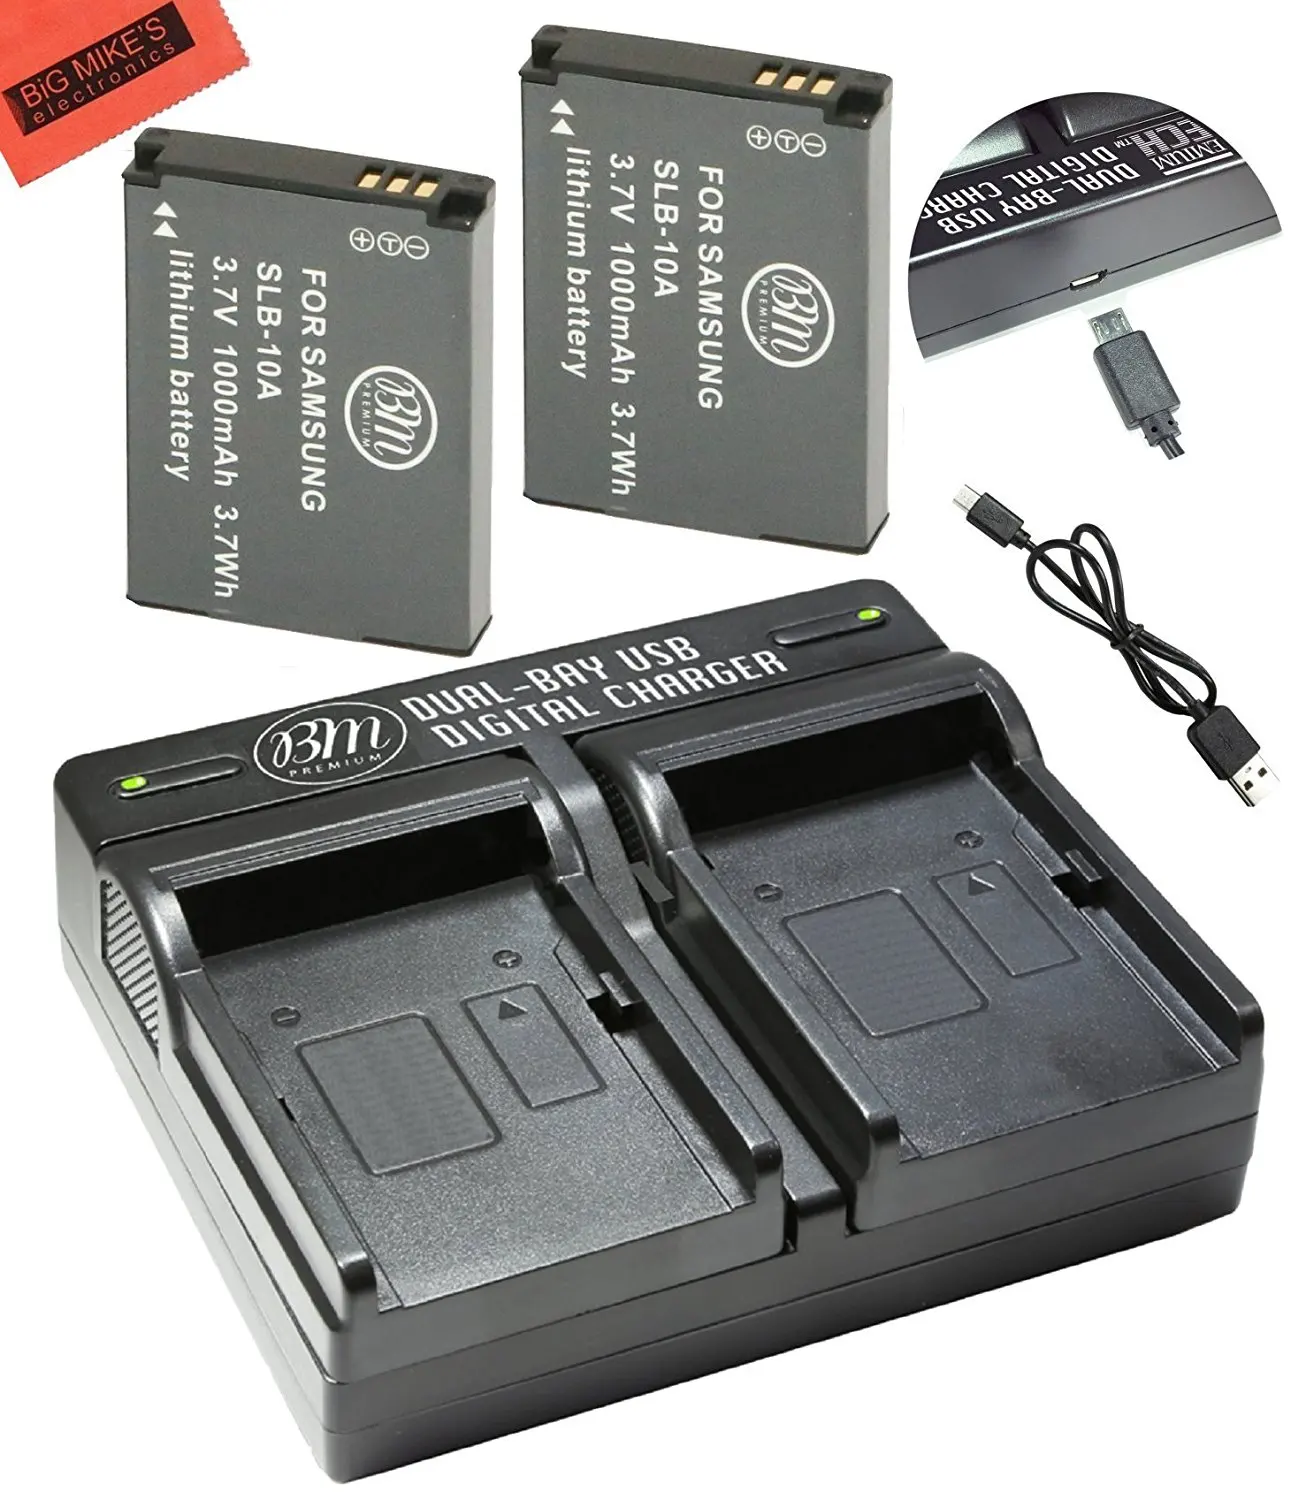 Buy Battery And Charger Kit For Samsung WB750, WB150F, EX2, EX2F